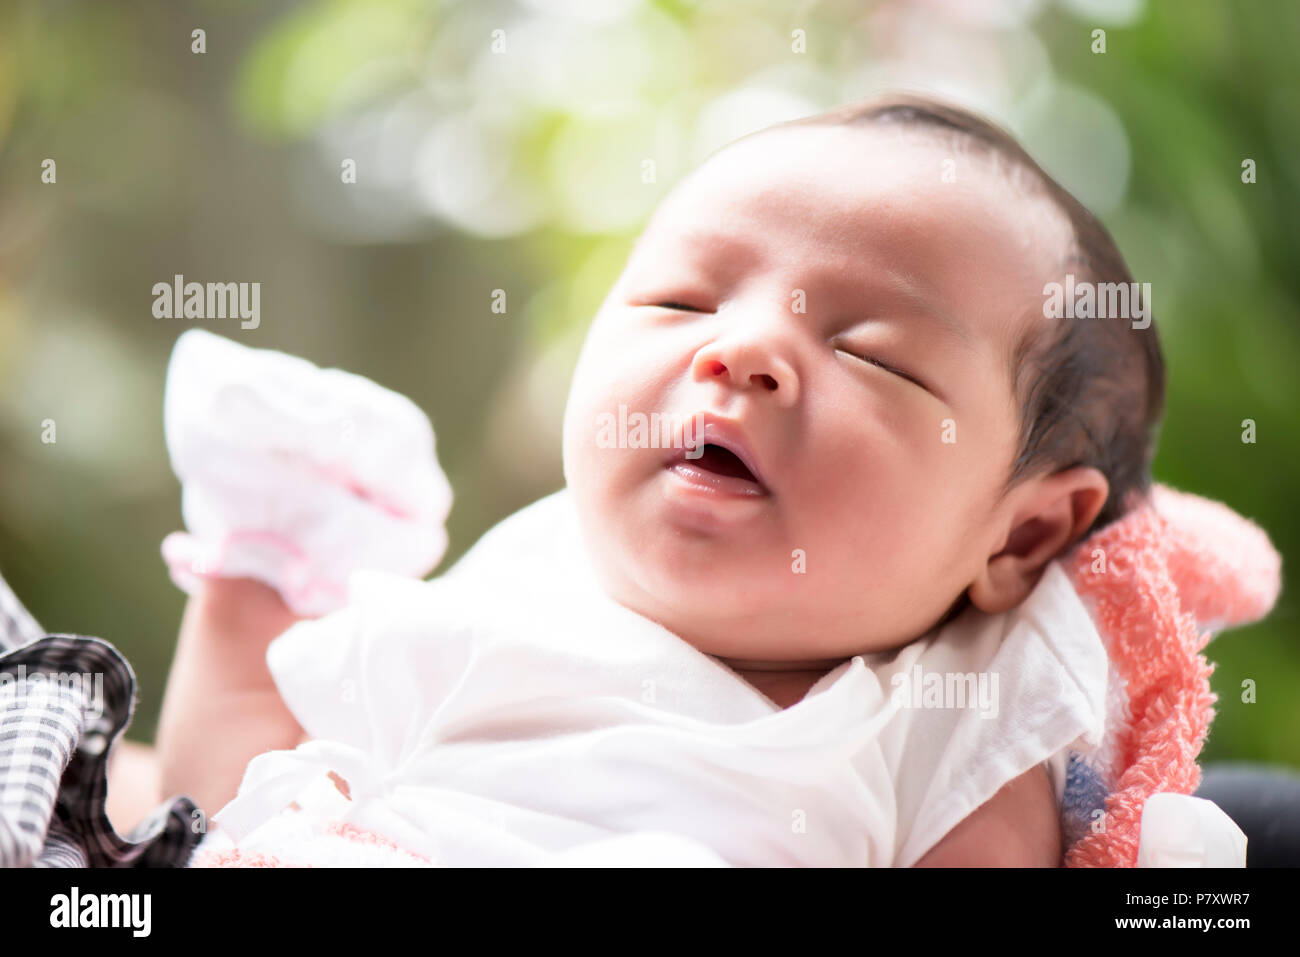 Newborn baby open her mouth in mother's hands, selective focus in her eyes, Family concept Stock Photo